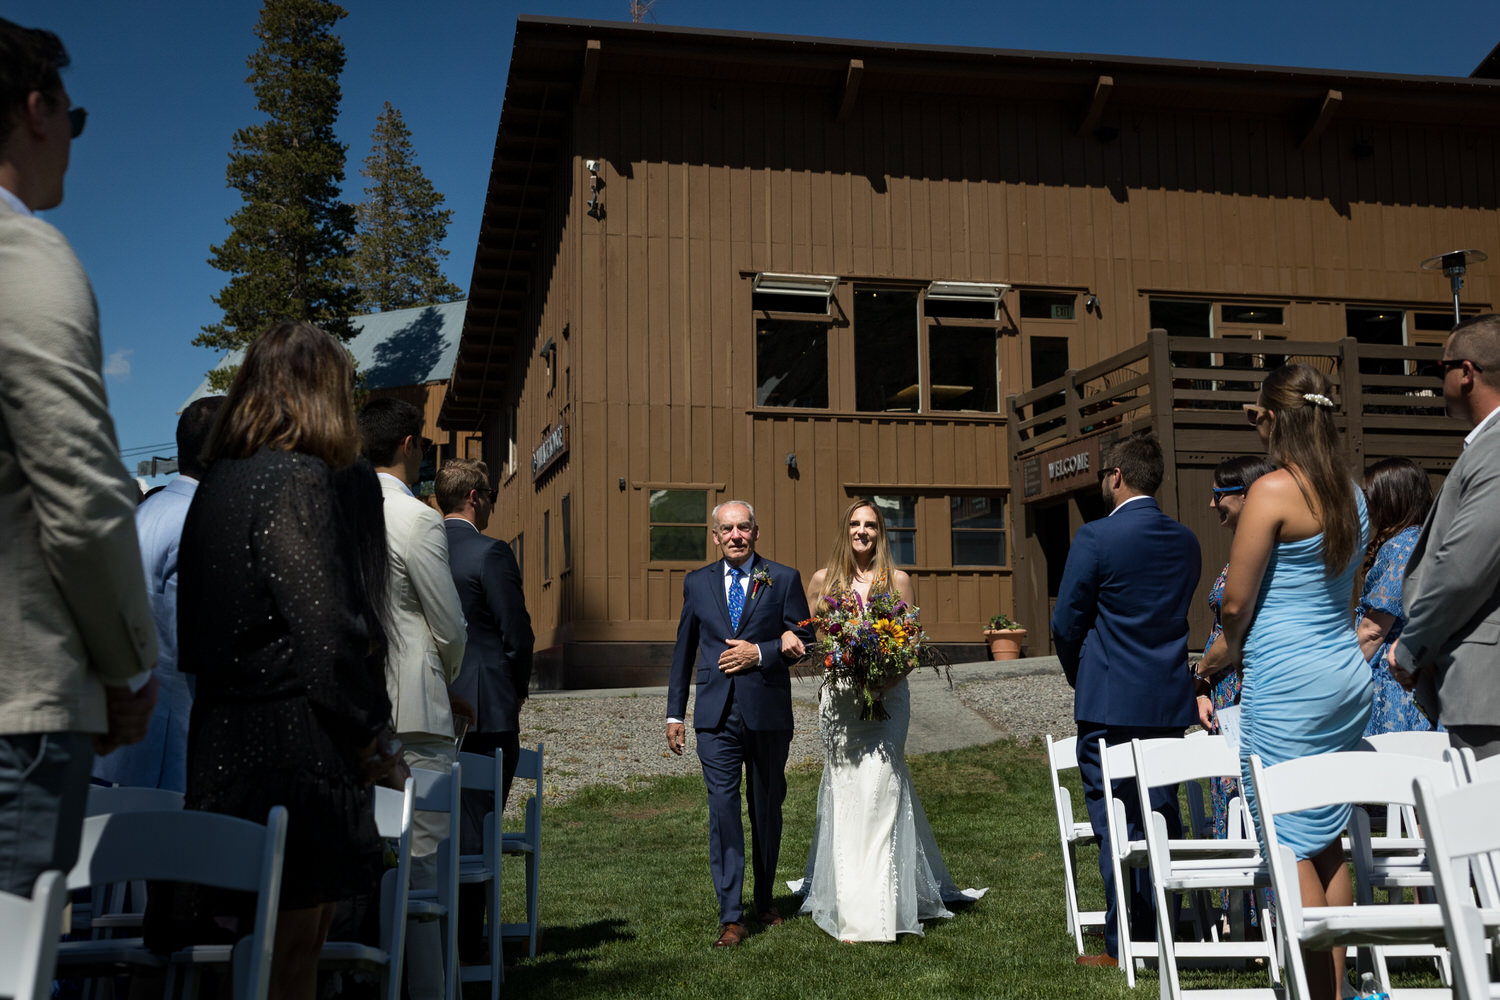 A bride walks down the aisle with her father in front of the iconic Sugar Bowl Lodge.